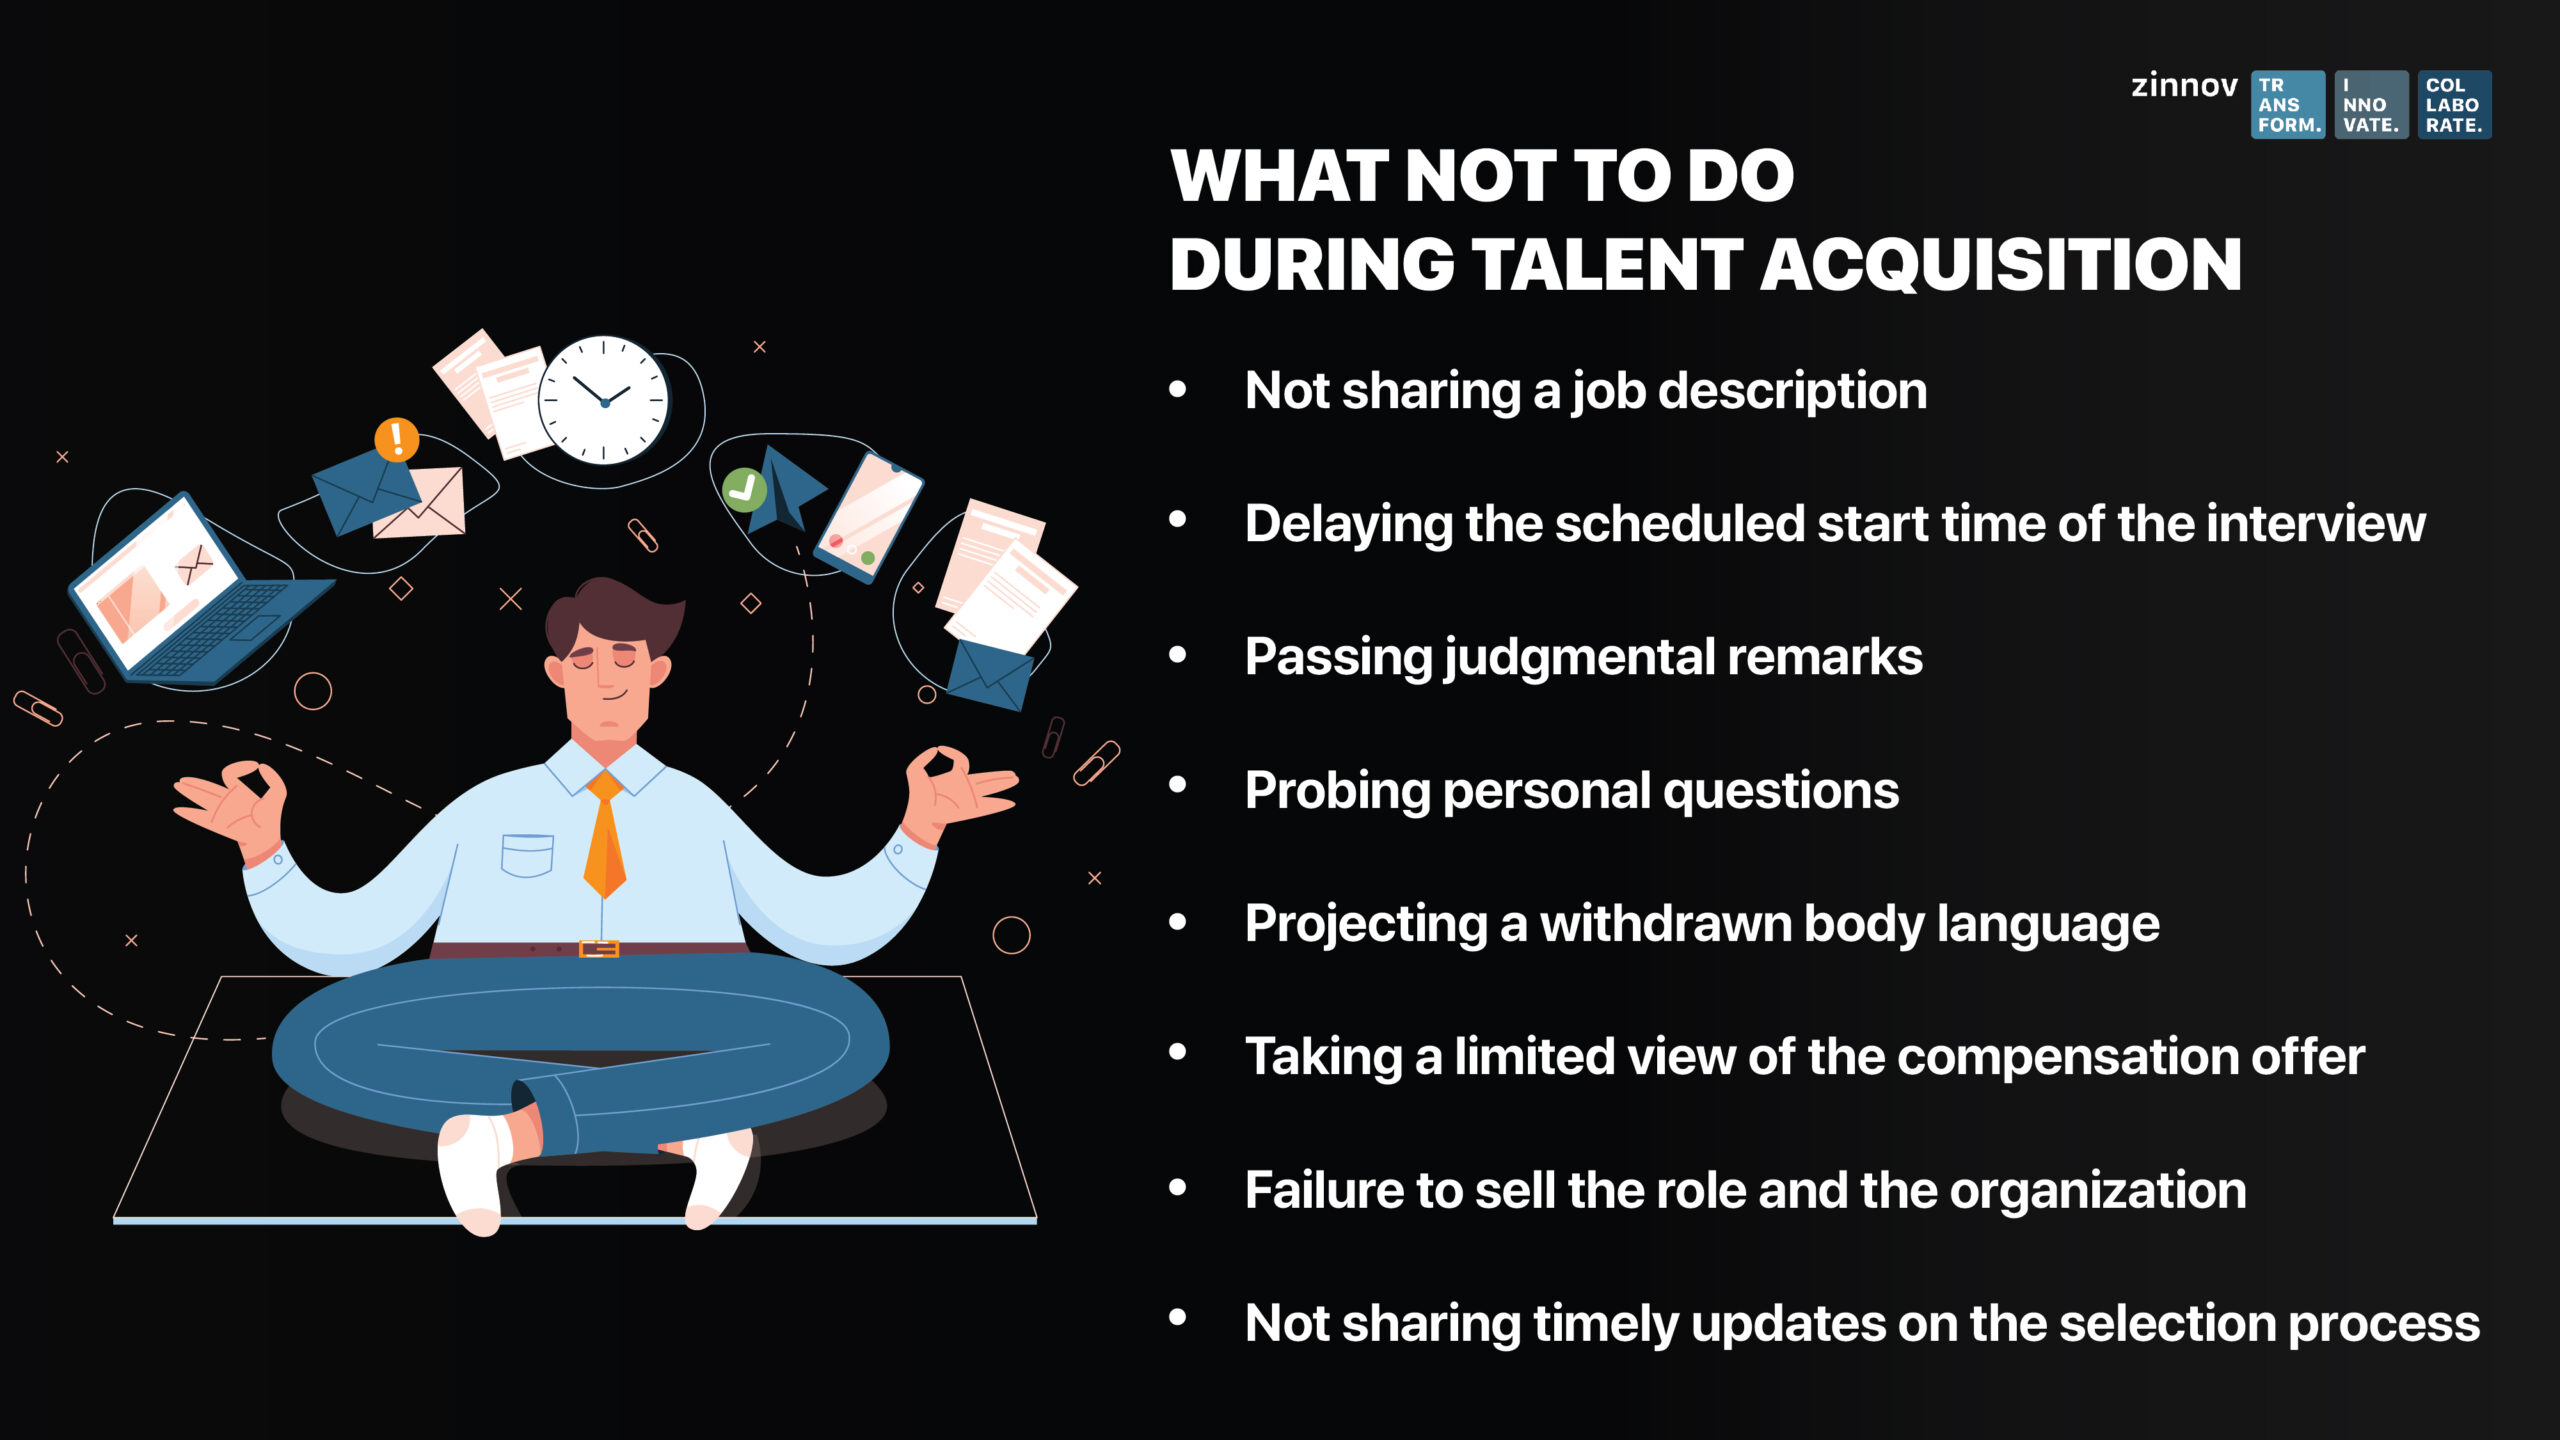 What not to do during talent acquisition